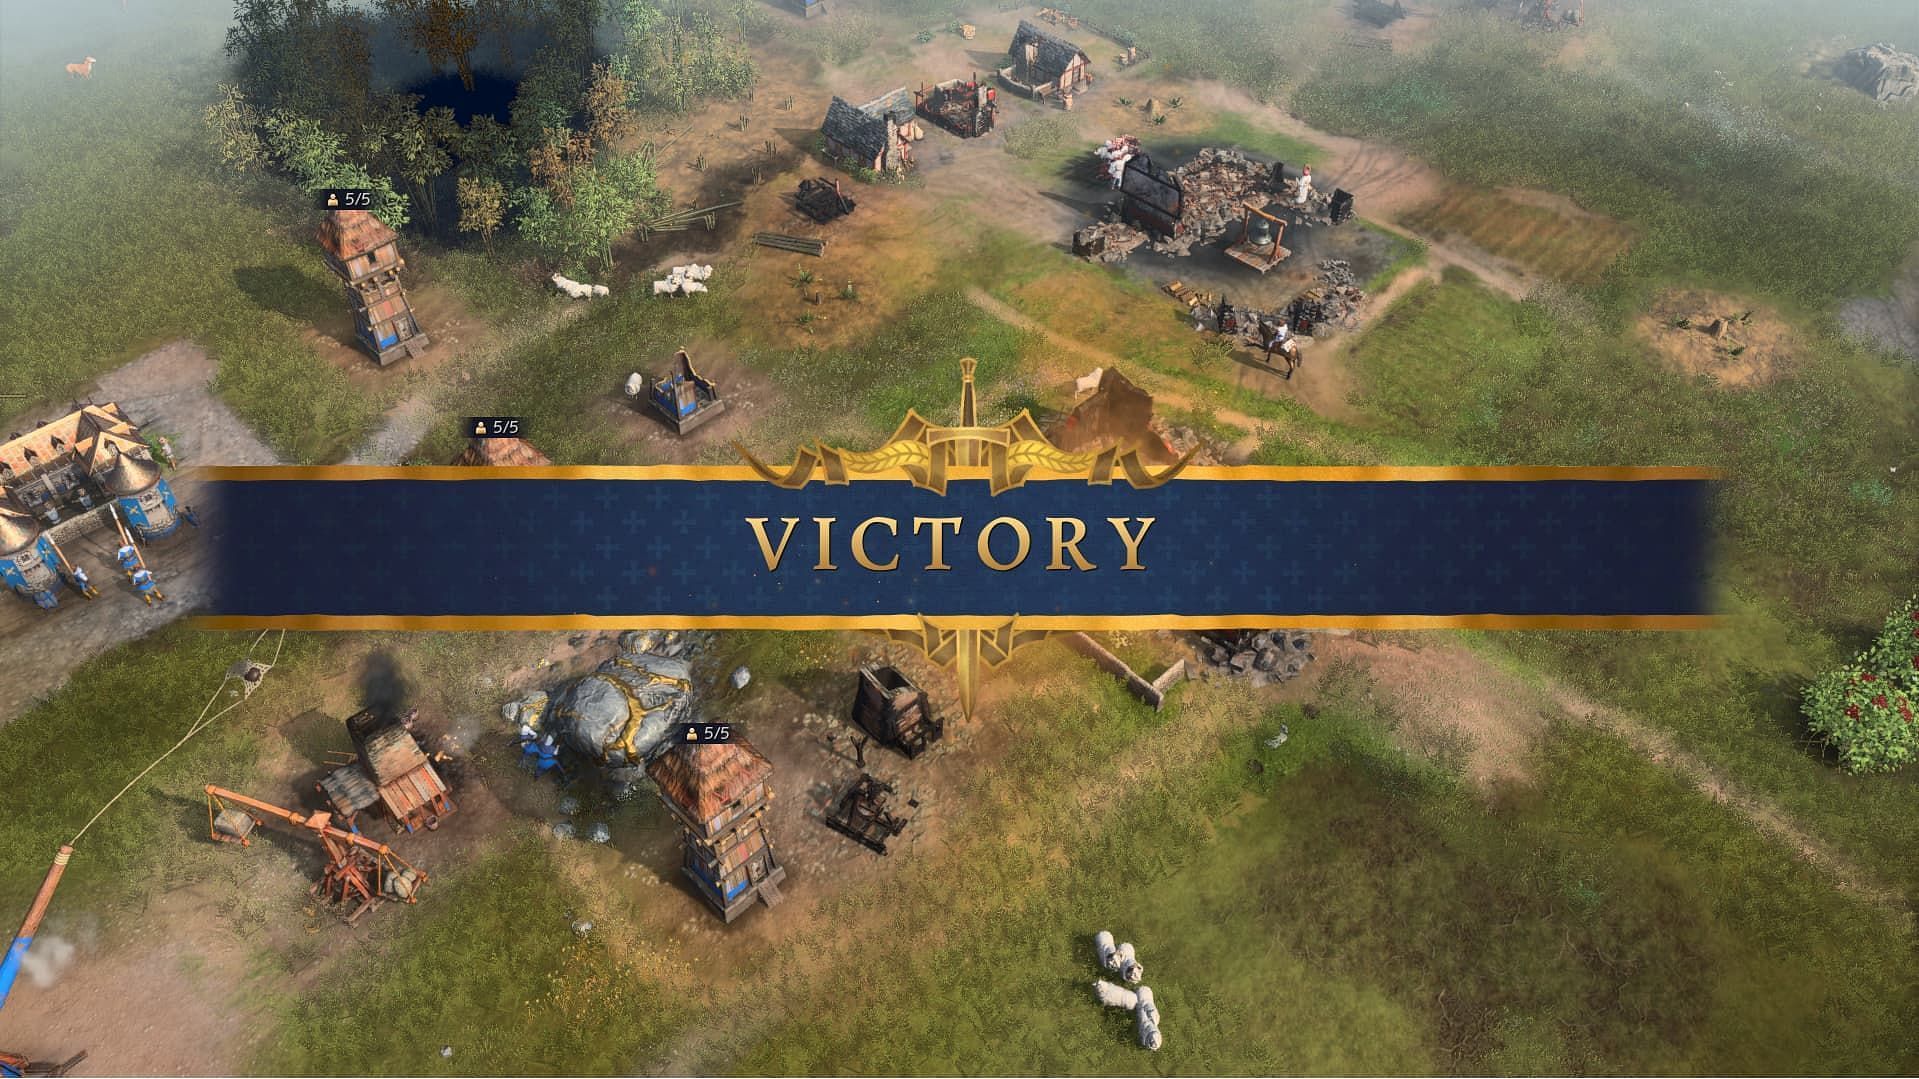 The Age of Empires IV victory screen. (Image via Relic Entertainment)